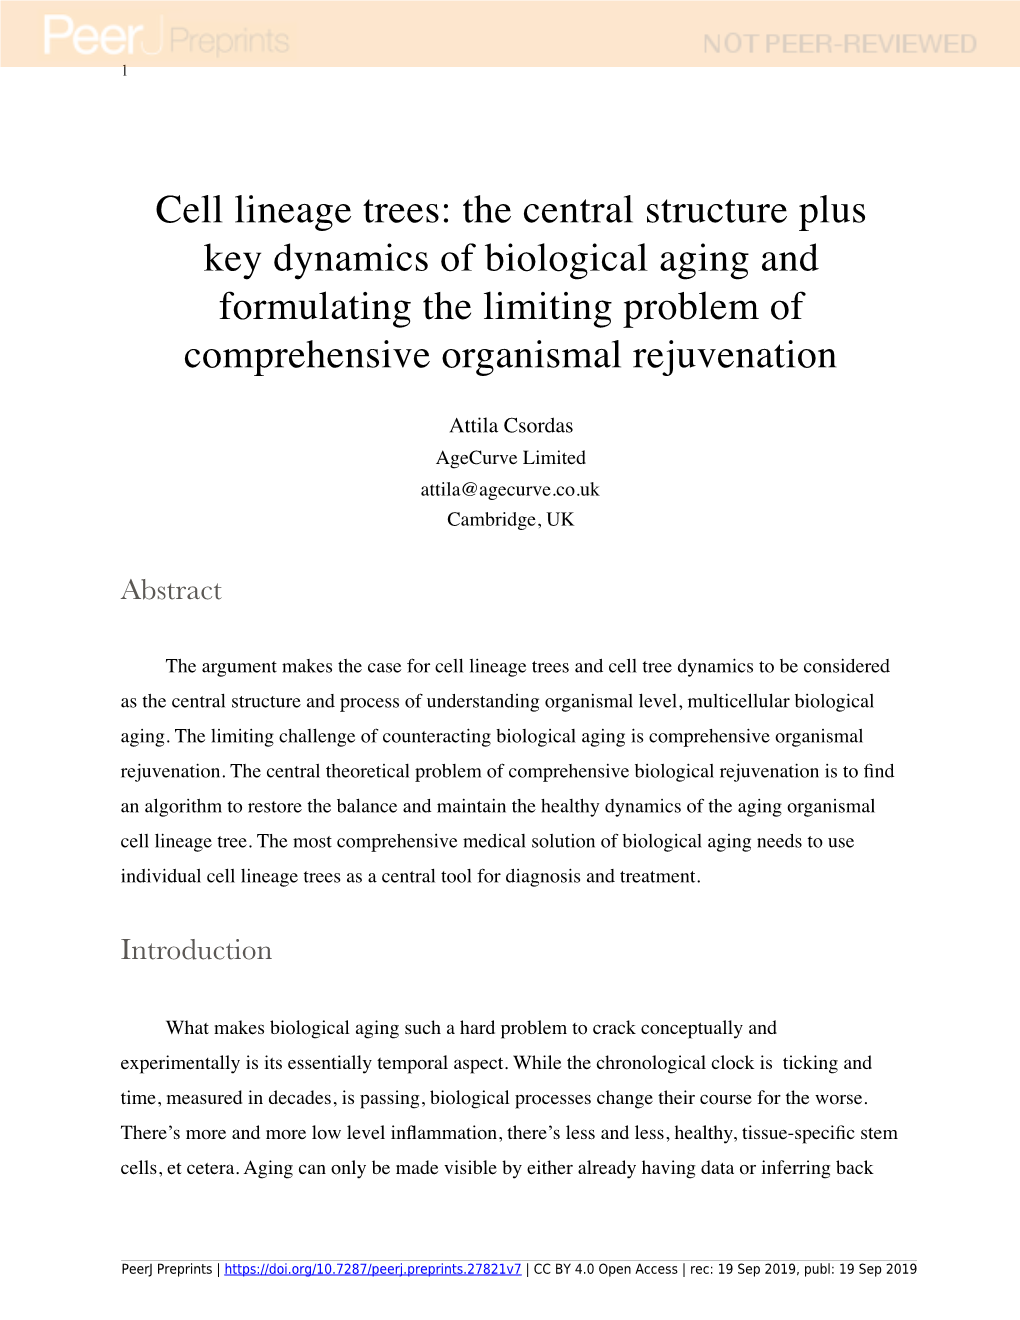 Cell Lineage Trees: the Central Structure Plus Key Dynamics of Biological Aging and Formulating the Limiting Problem of Comprehensive Organismal Rejuvenation